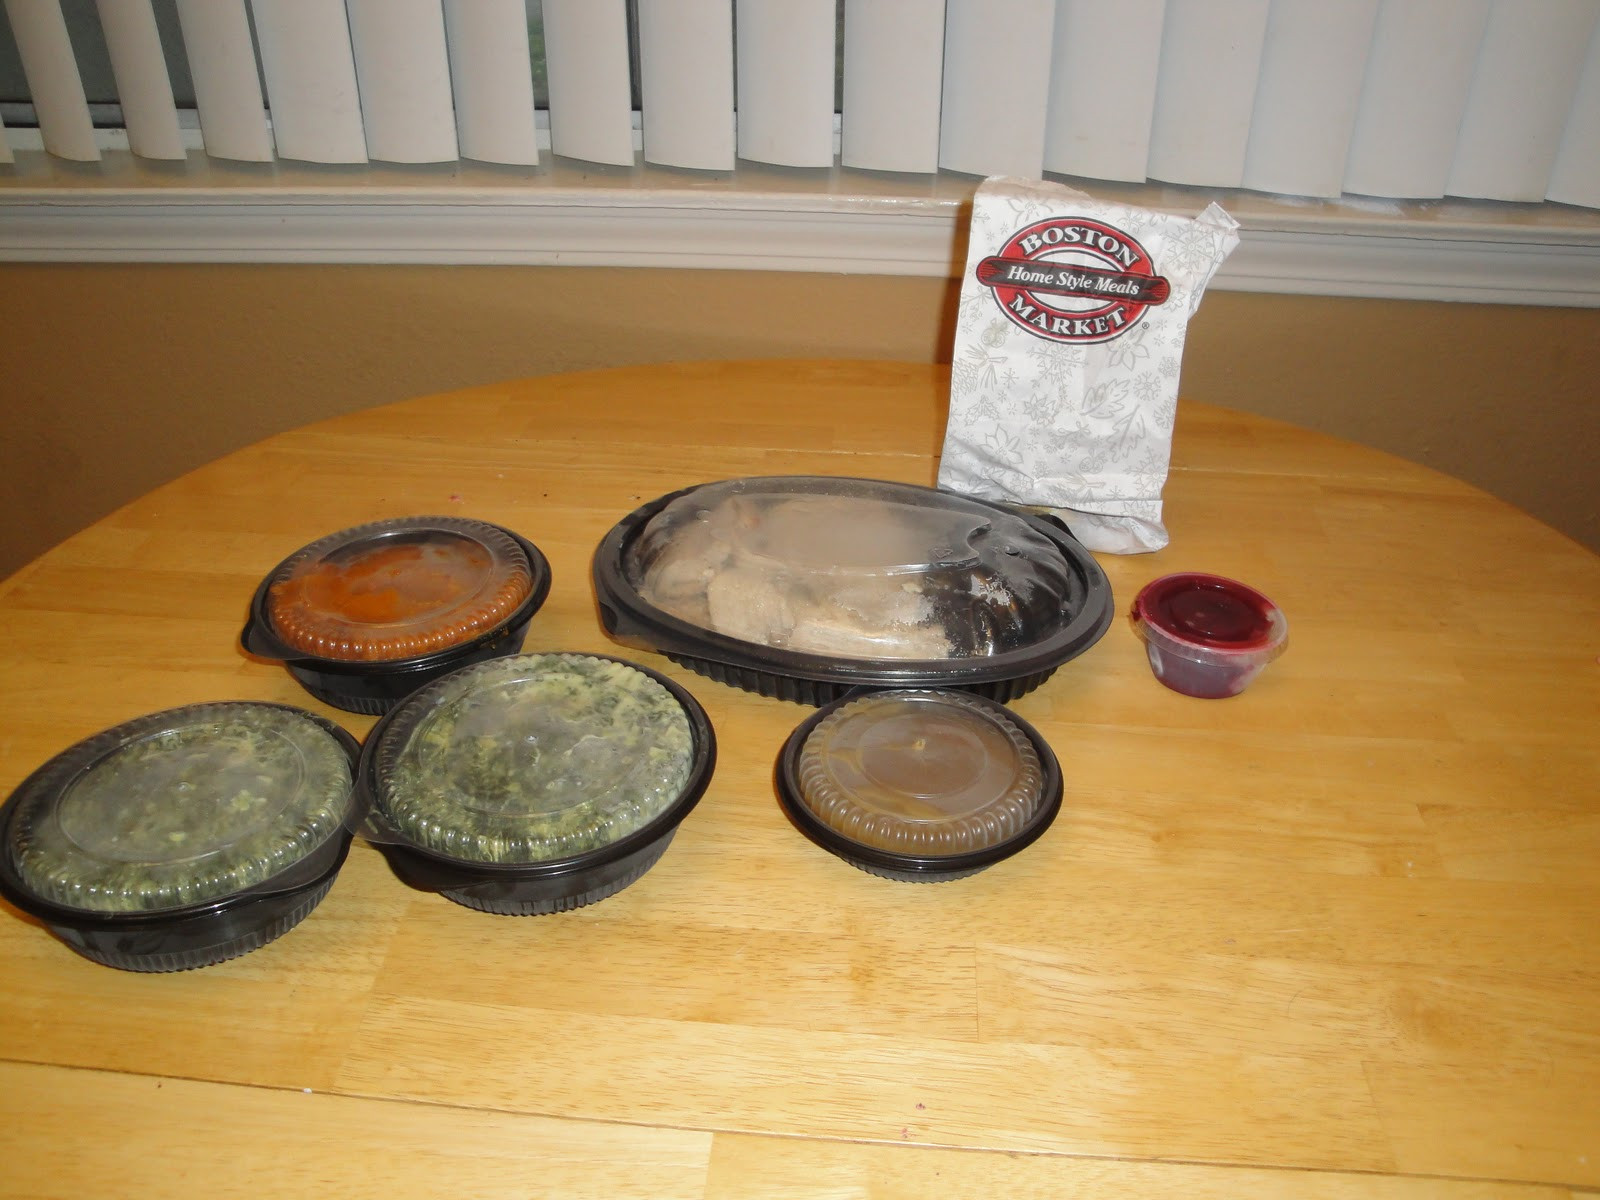 Boston Market Thanksgiving Dinners To Go
 Boston Market Holiday Meals Review